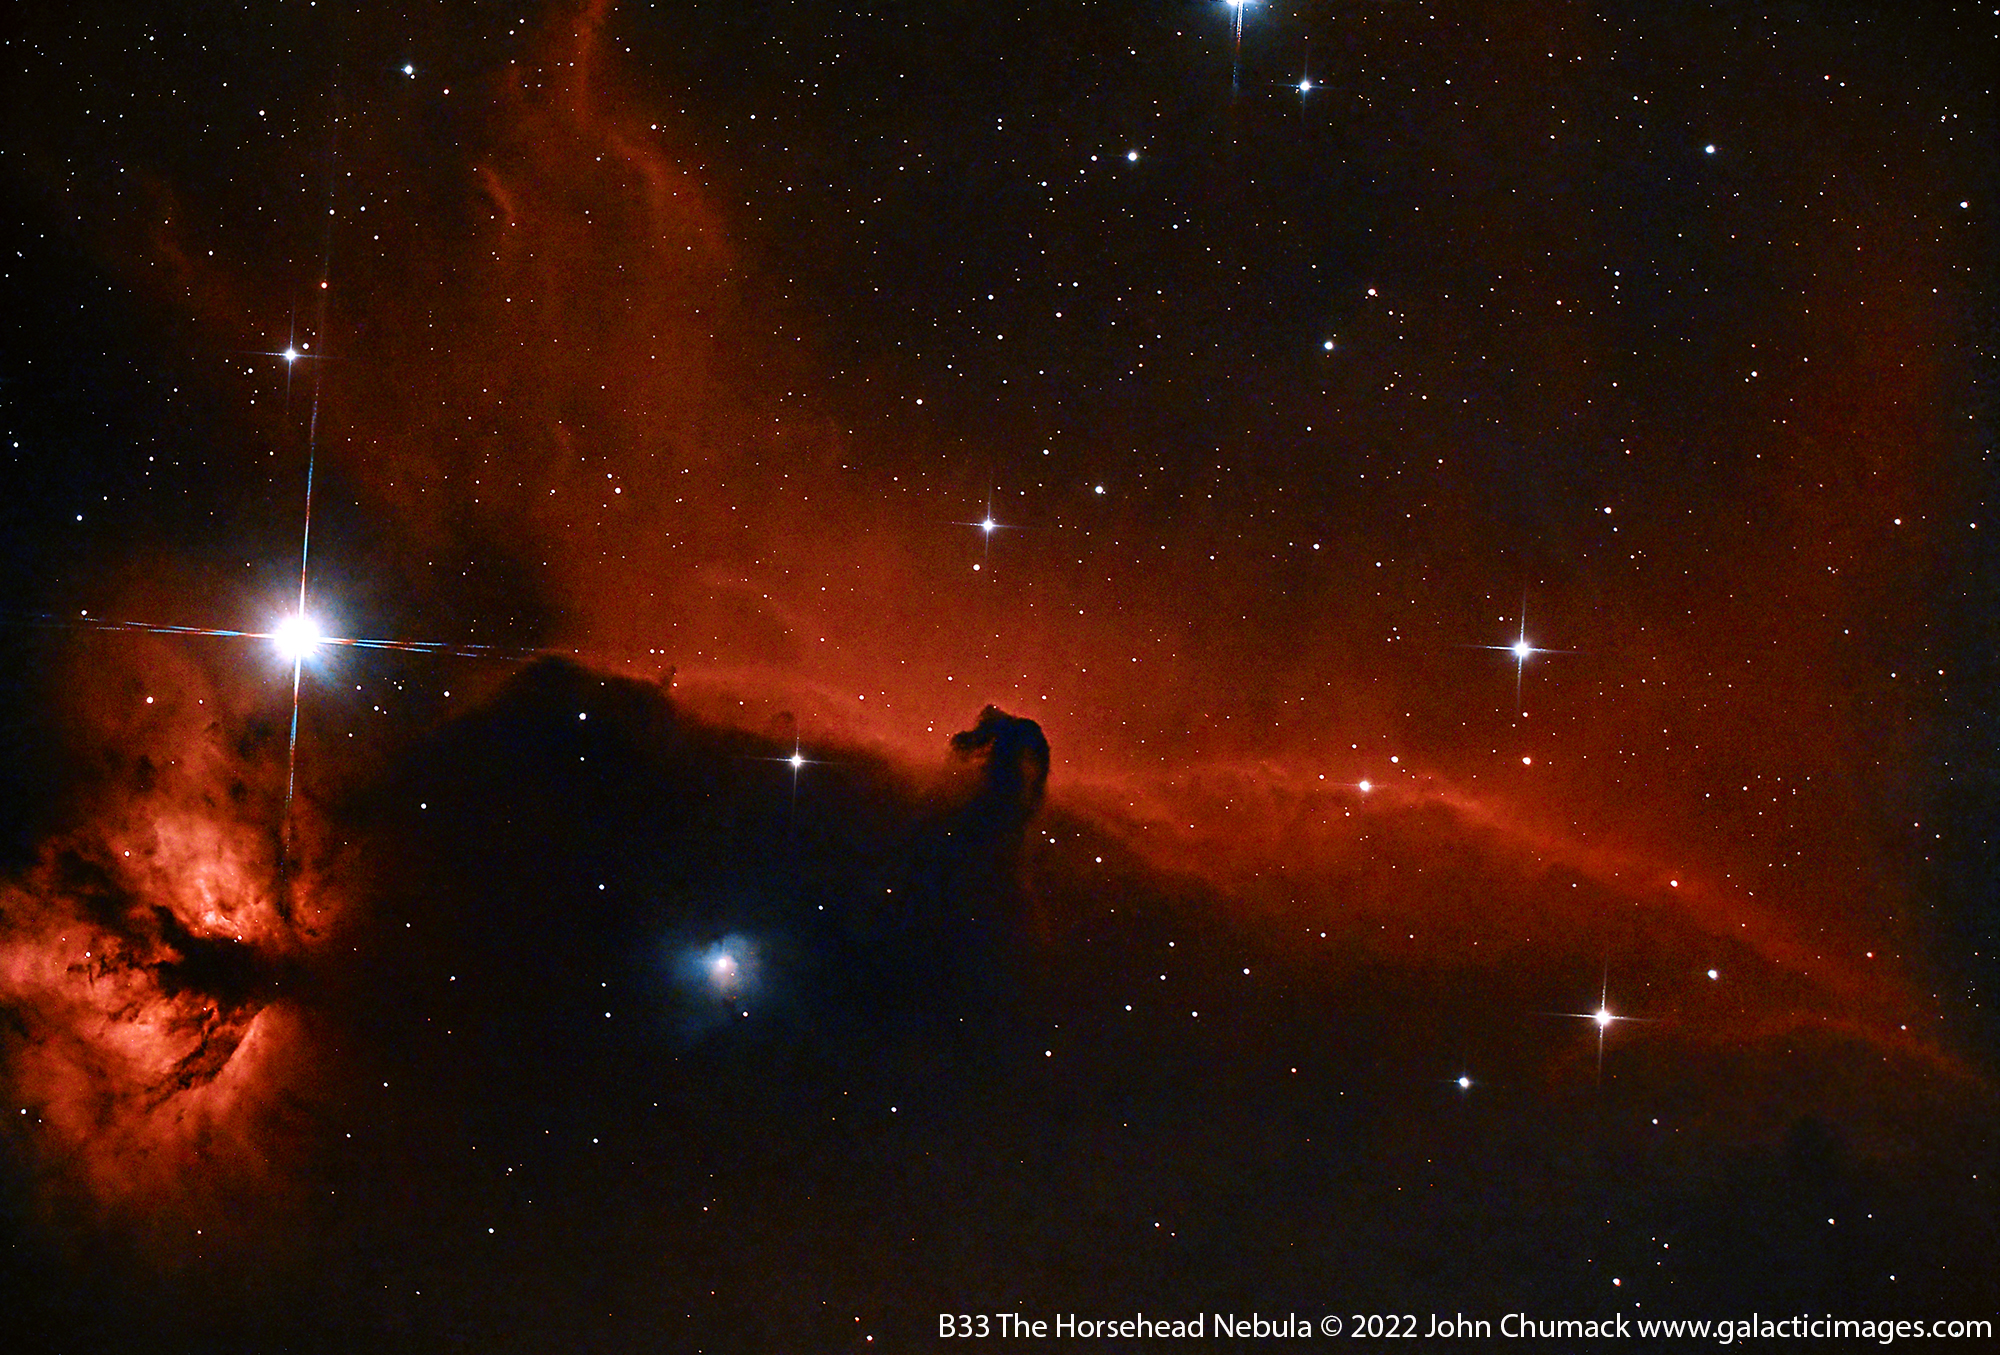 The Horsehead Nebula (also known as Barnard 33) in Orion